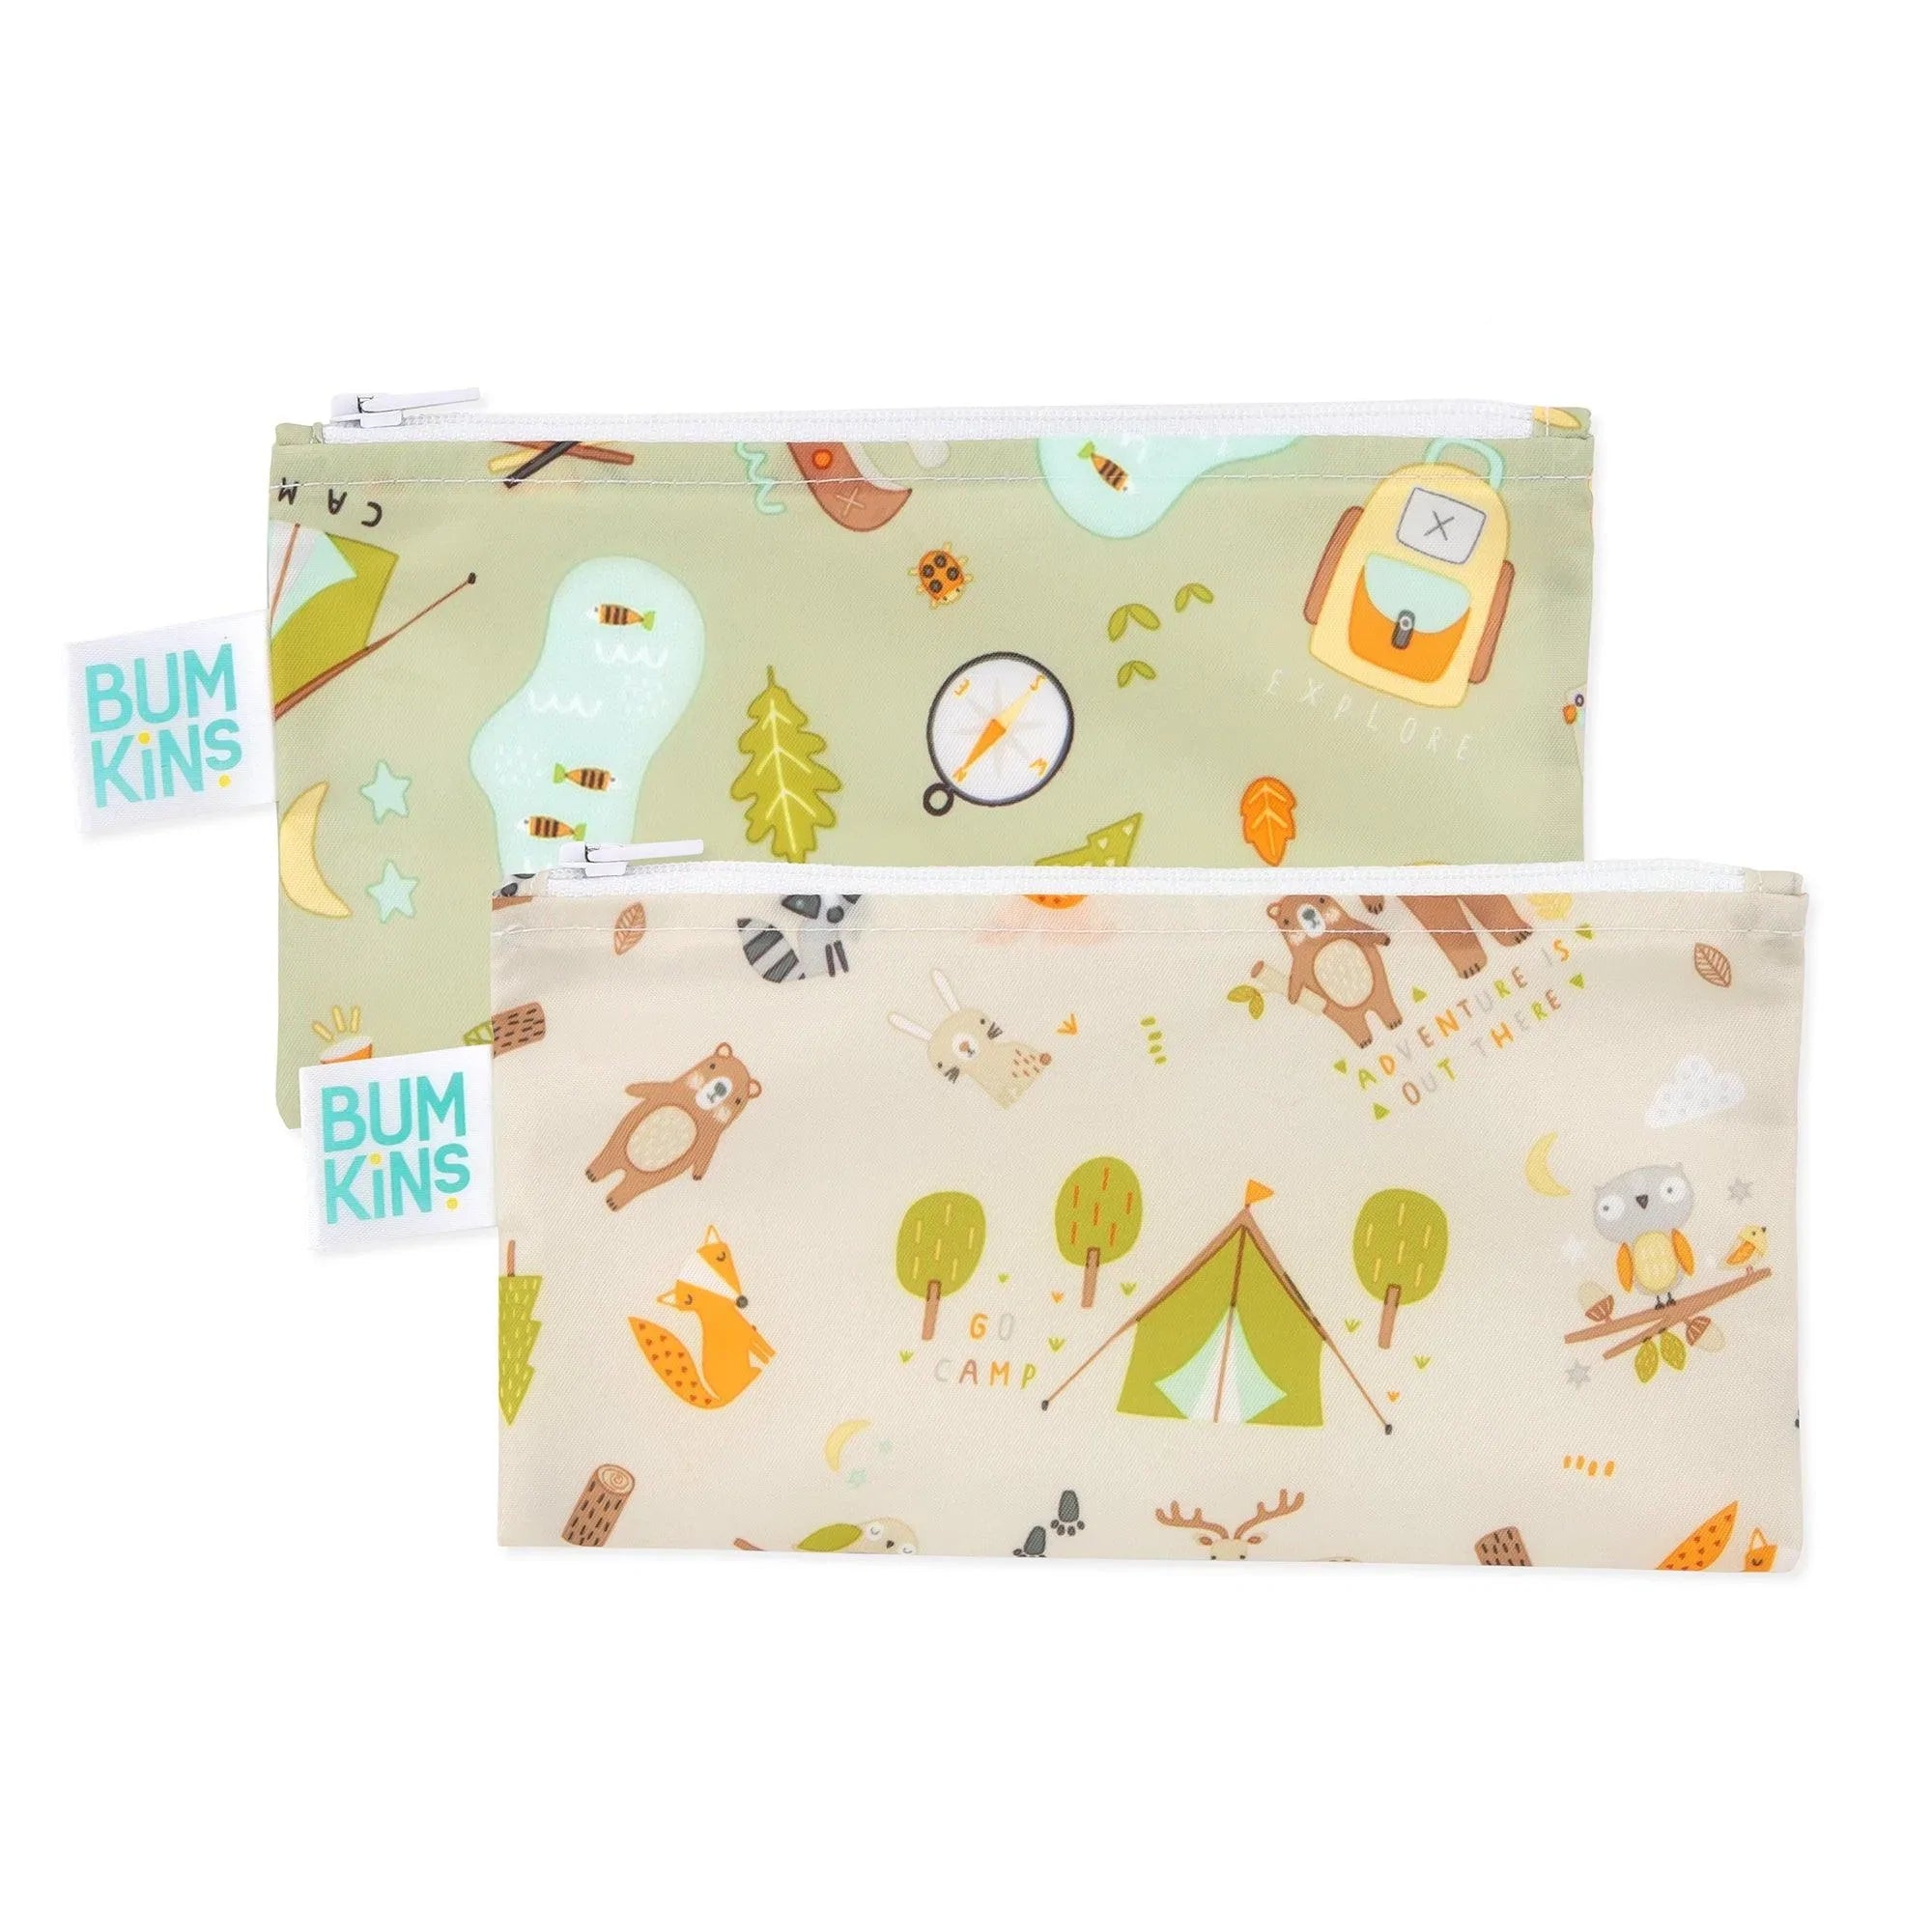 Bumkins Reusable Snack Bags Small Camp Friends & Camp Gear